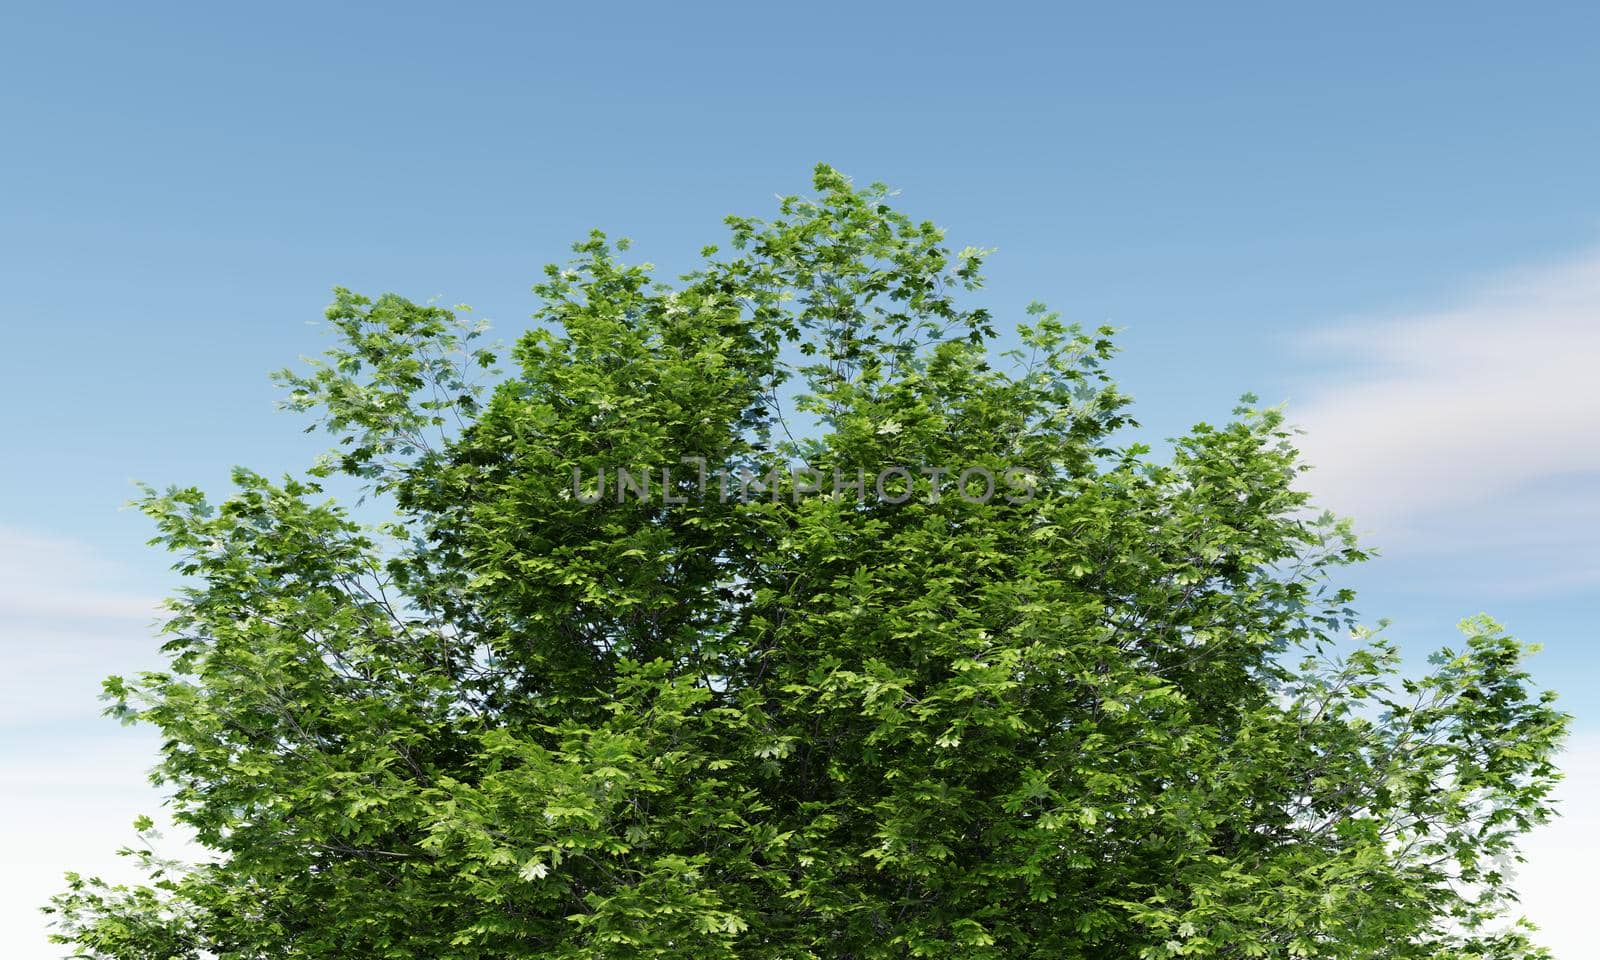 Closeup of green tree top with cloudy sky background. Nature and landscape concept. 3D illustration rendering